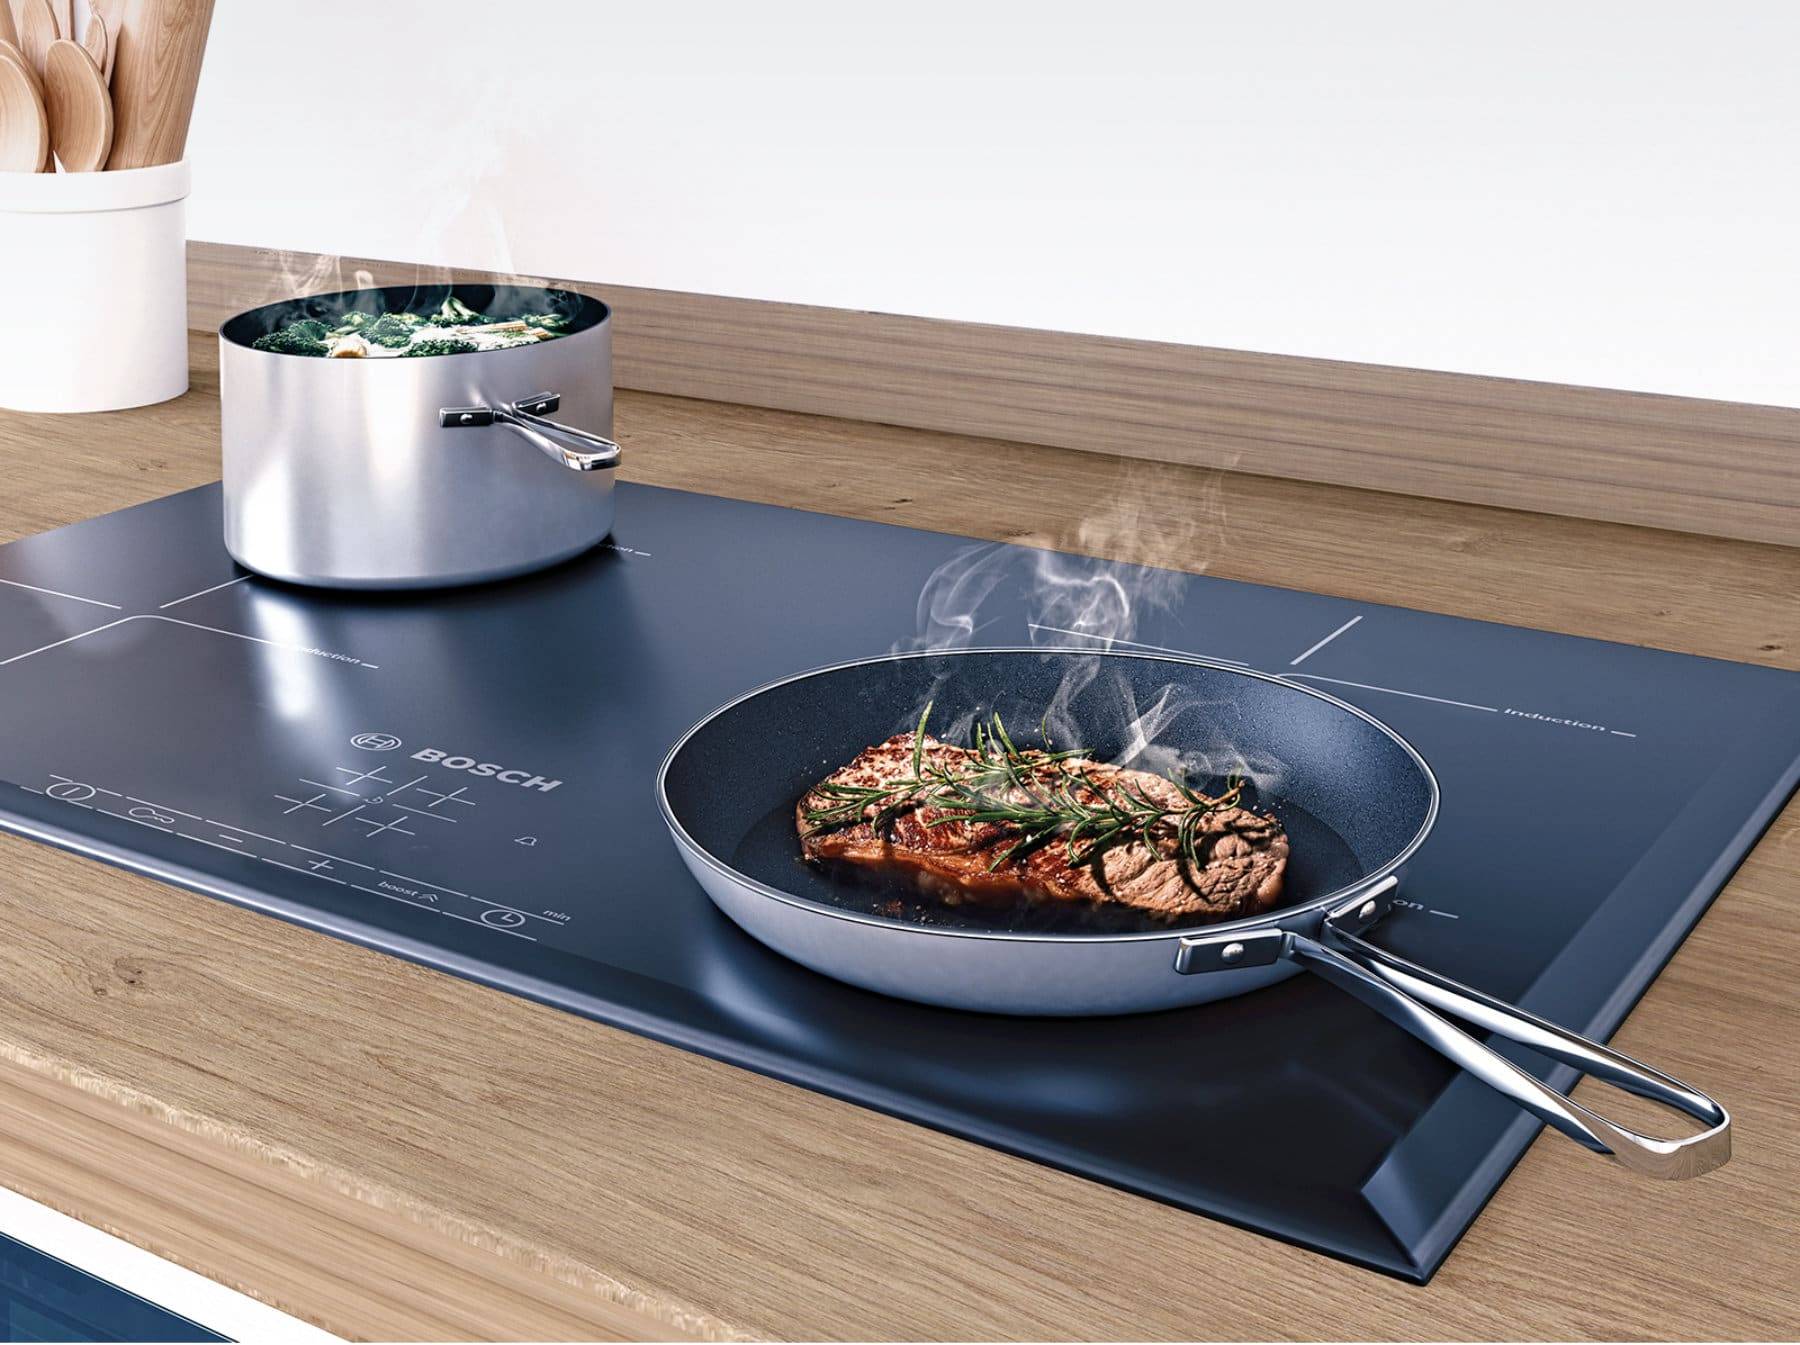 Builtin Induction Hob Pie651Bb1E0 | Nobilia German Kitchens by Square, Sheffield